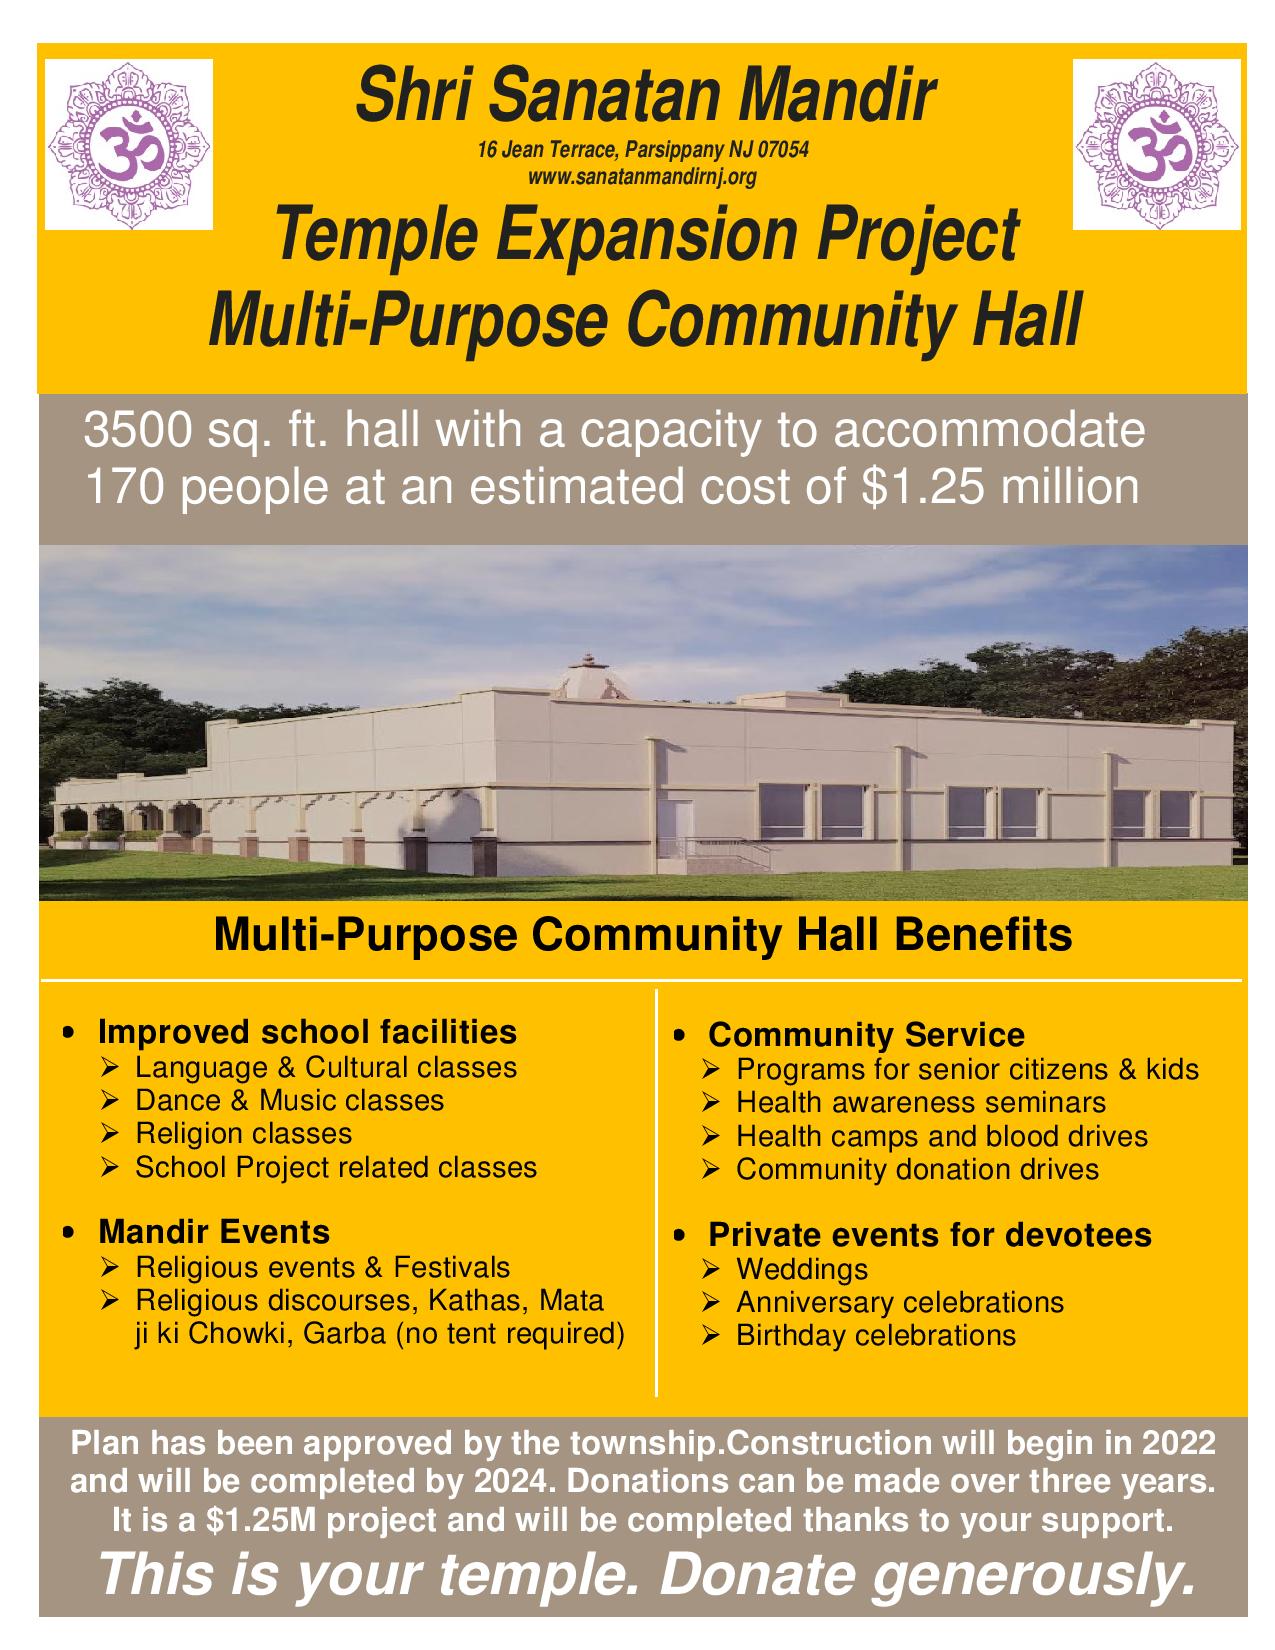 Please support Hall Construction.